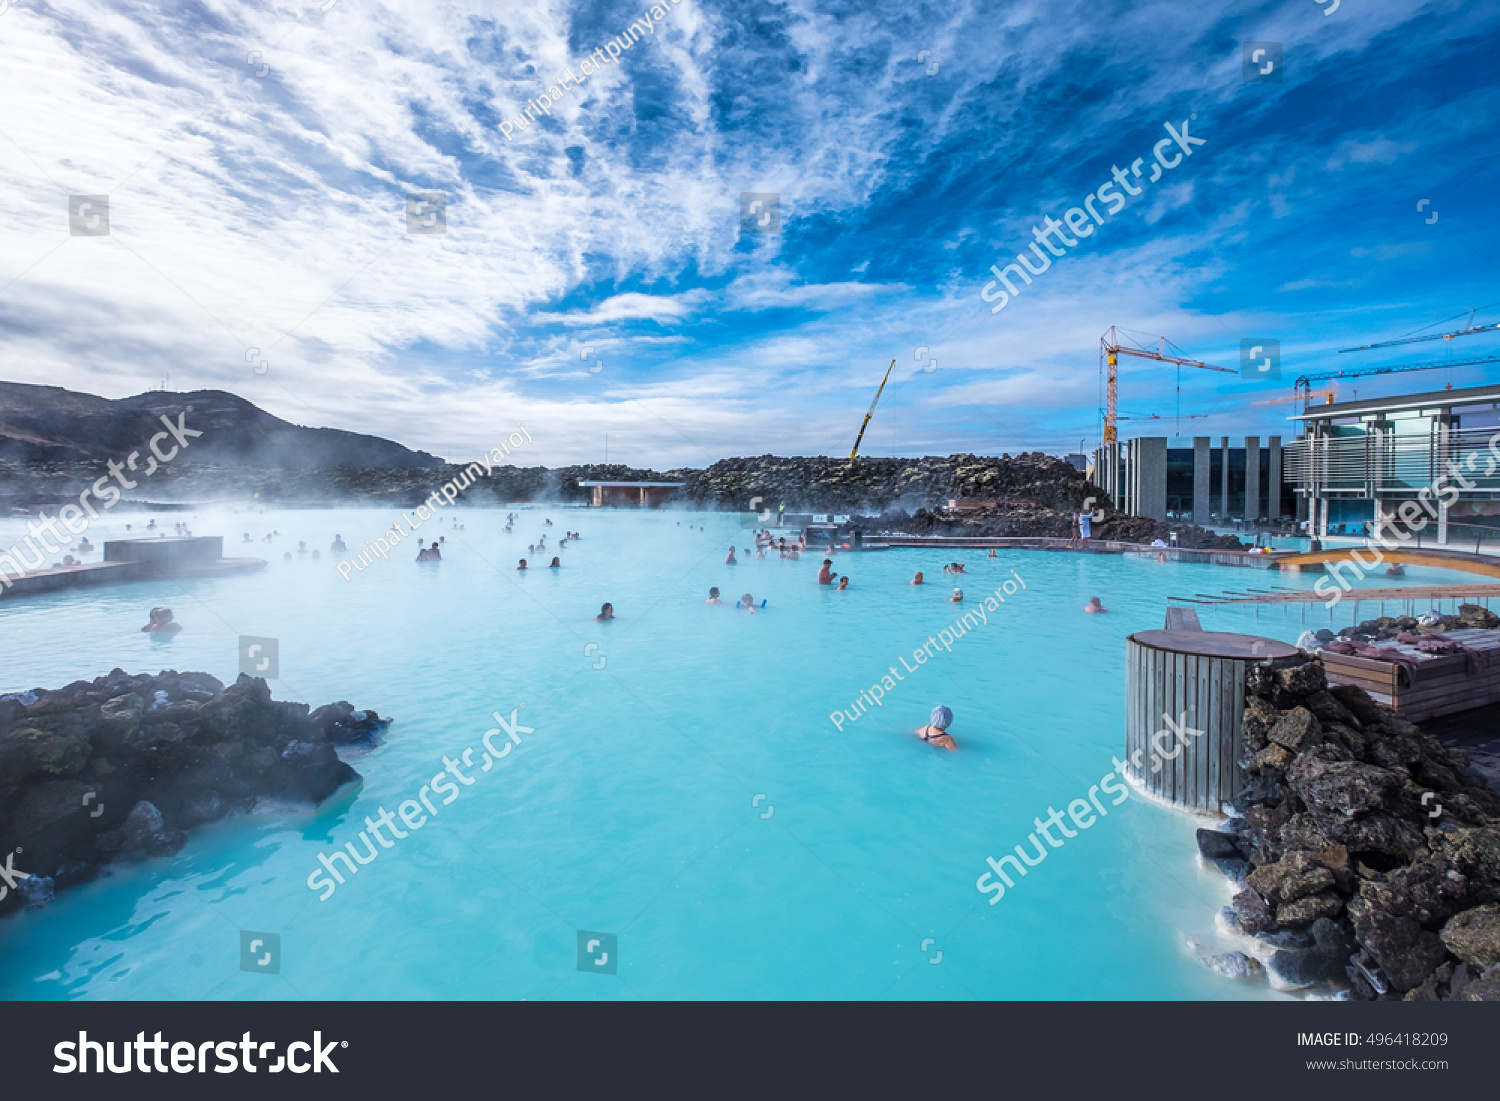 The Blue Lagoon geothermal spa is one of the most visited attractions in Iceland #496418209